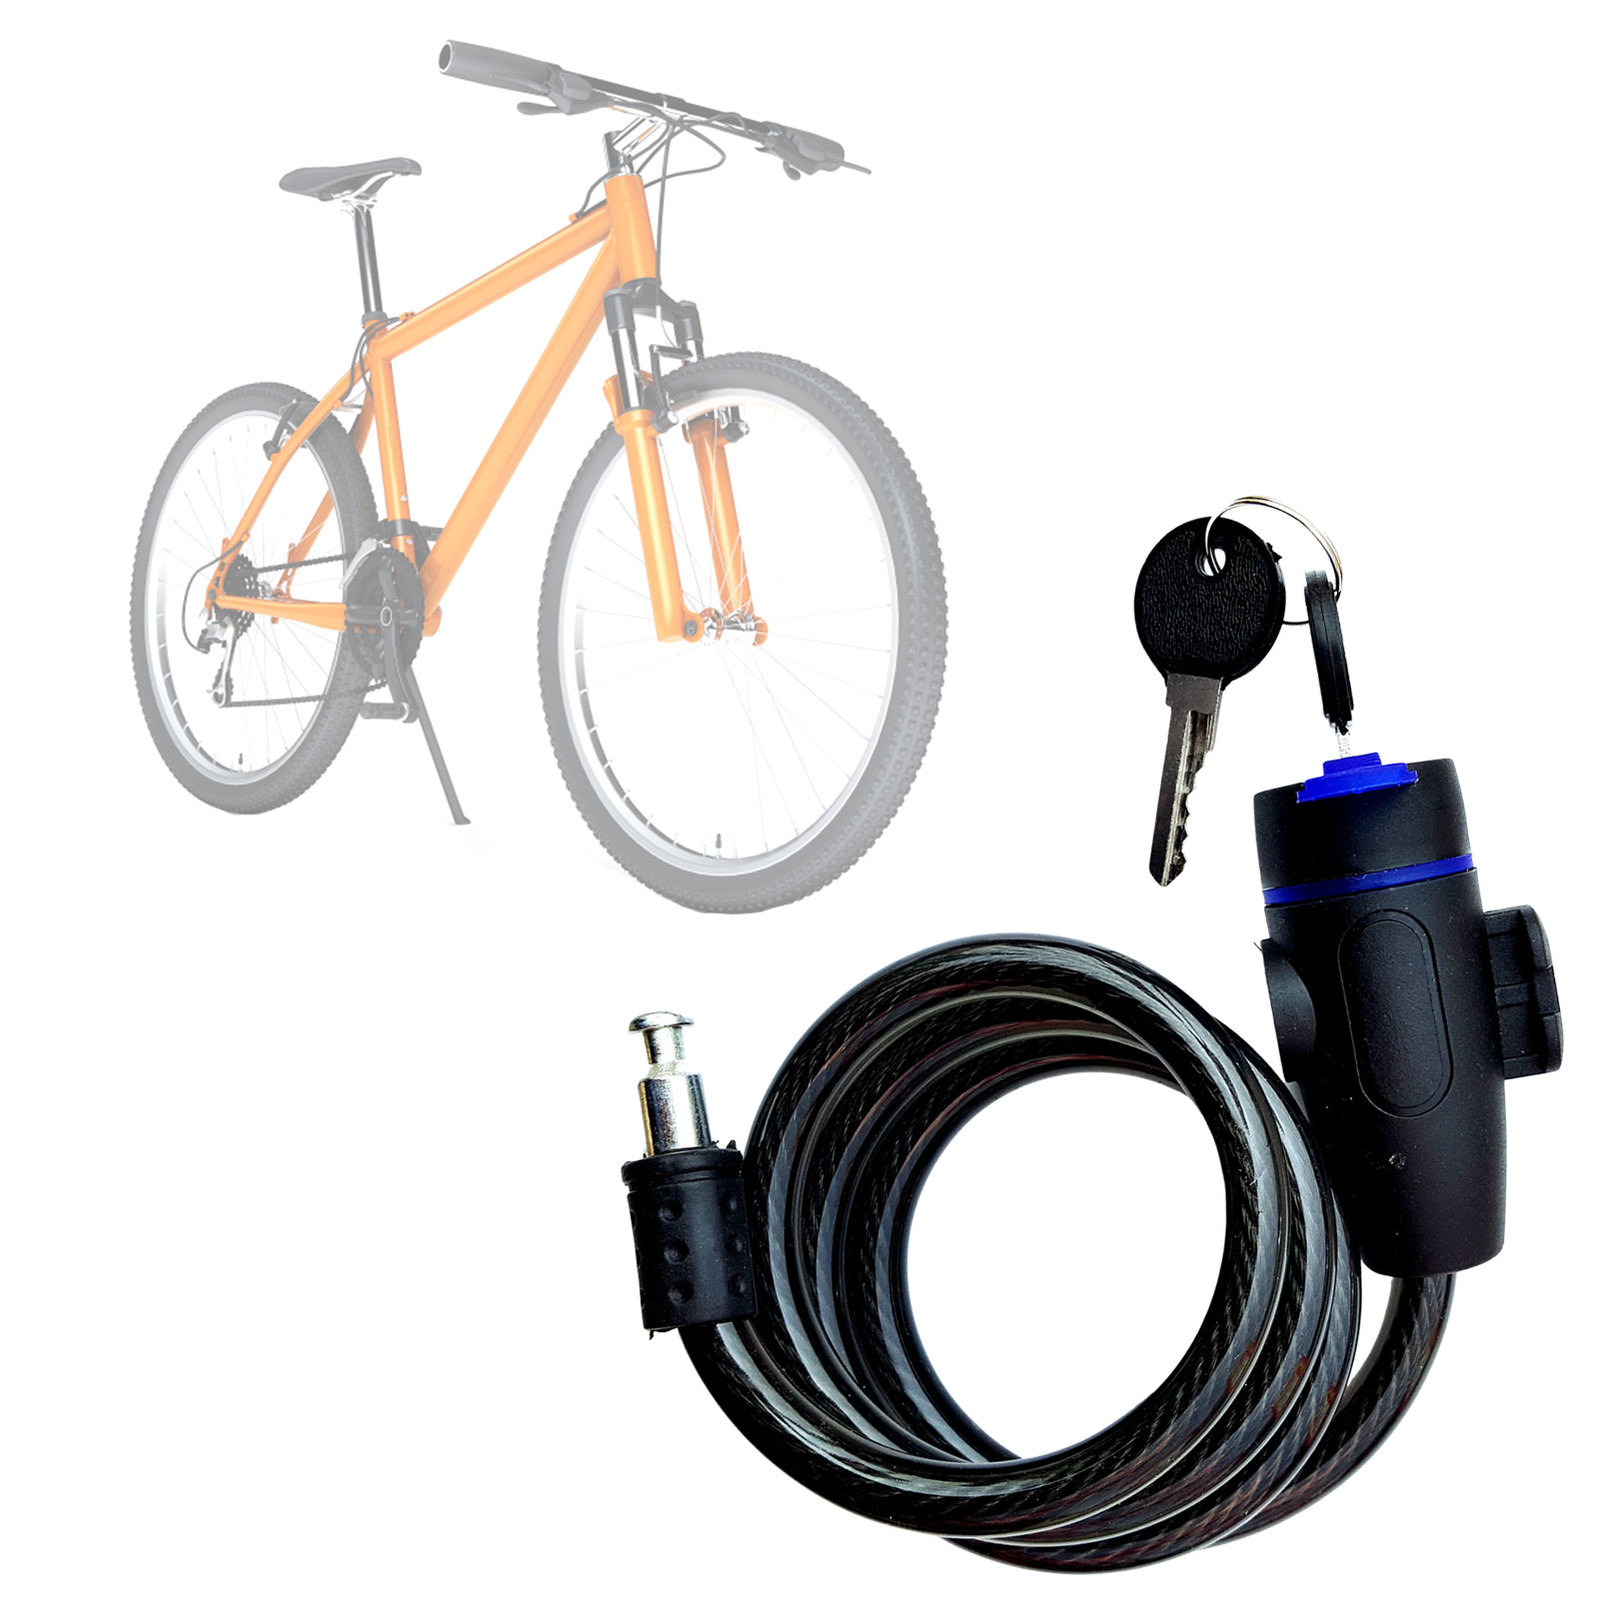 Bike Lock Cable Portable Bicycle Cable Lock With Key Easy e Anti-Theft Spiral St